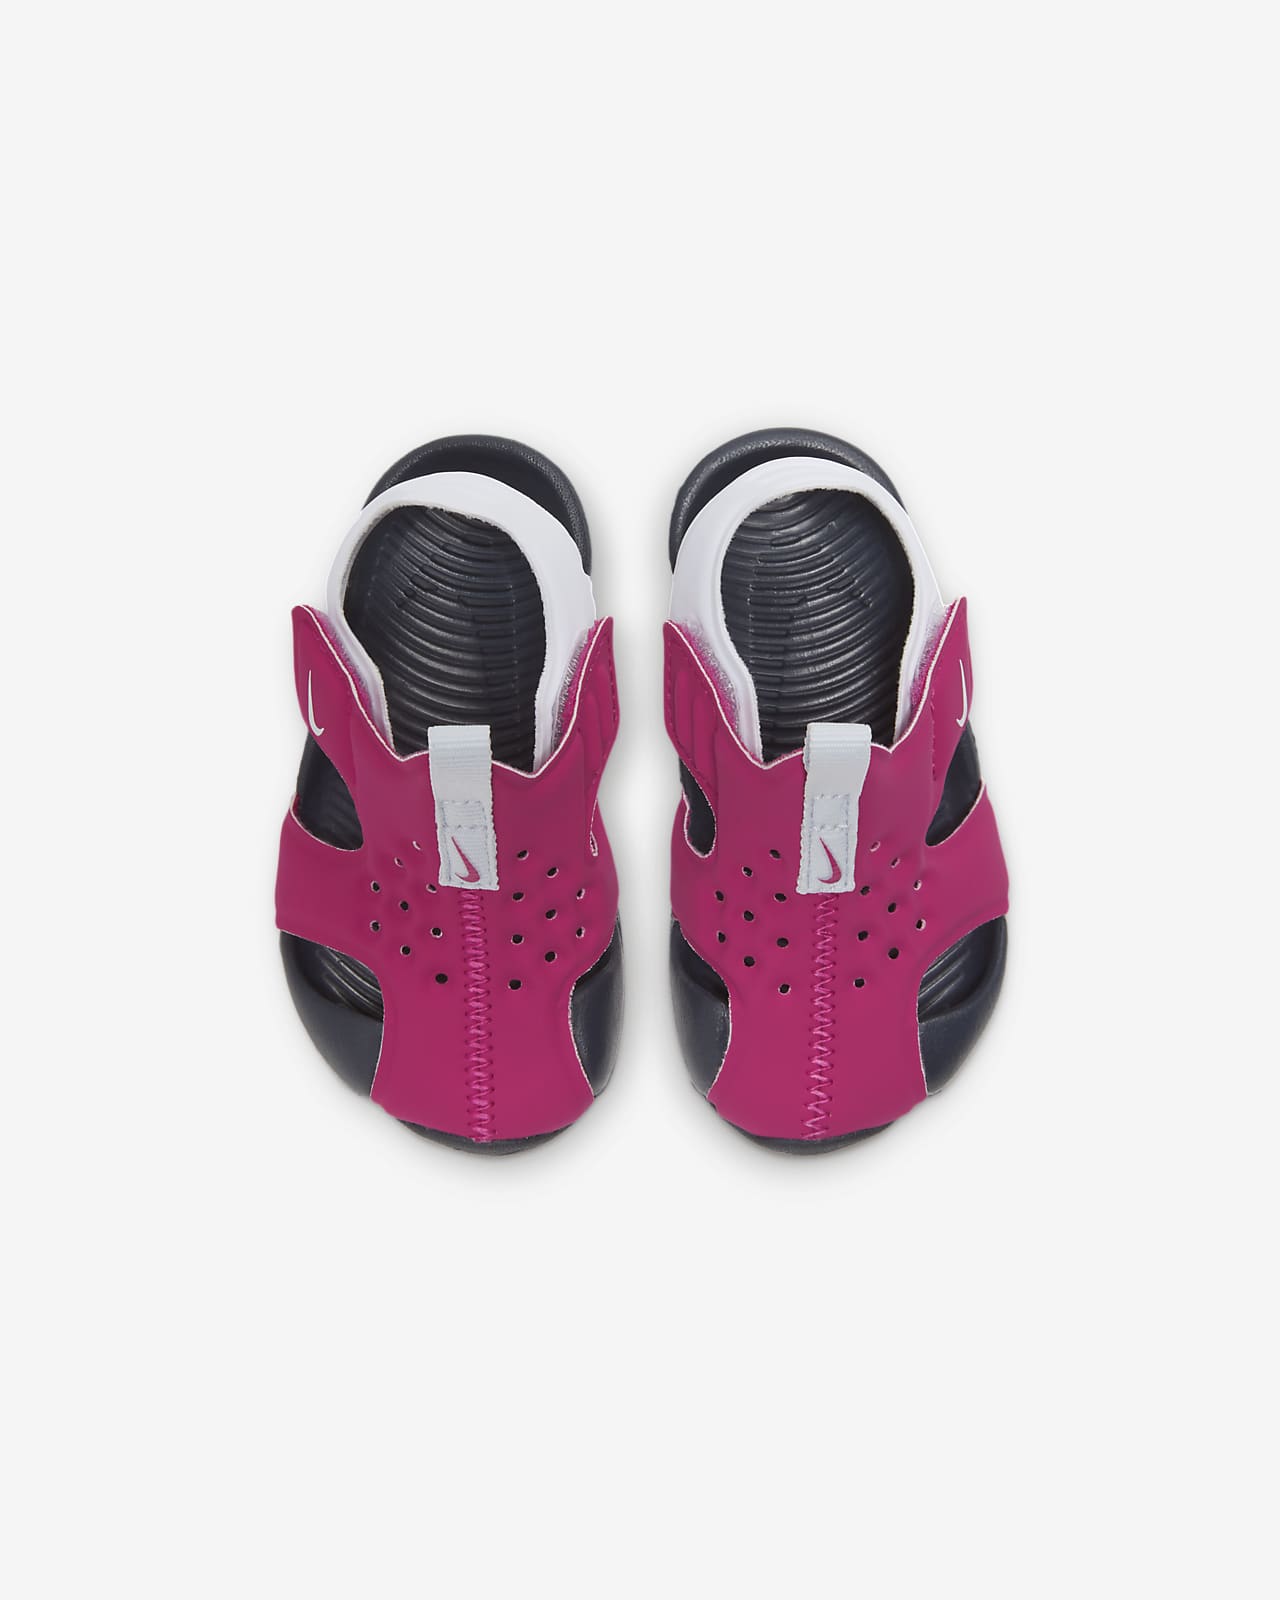 sunray protect sandals